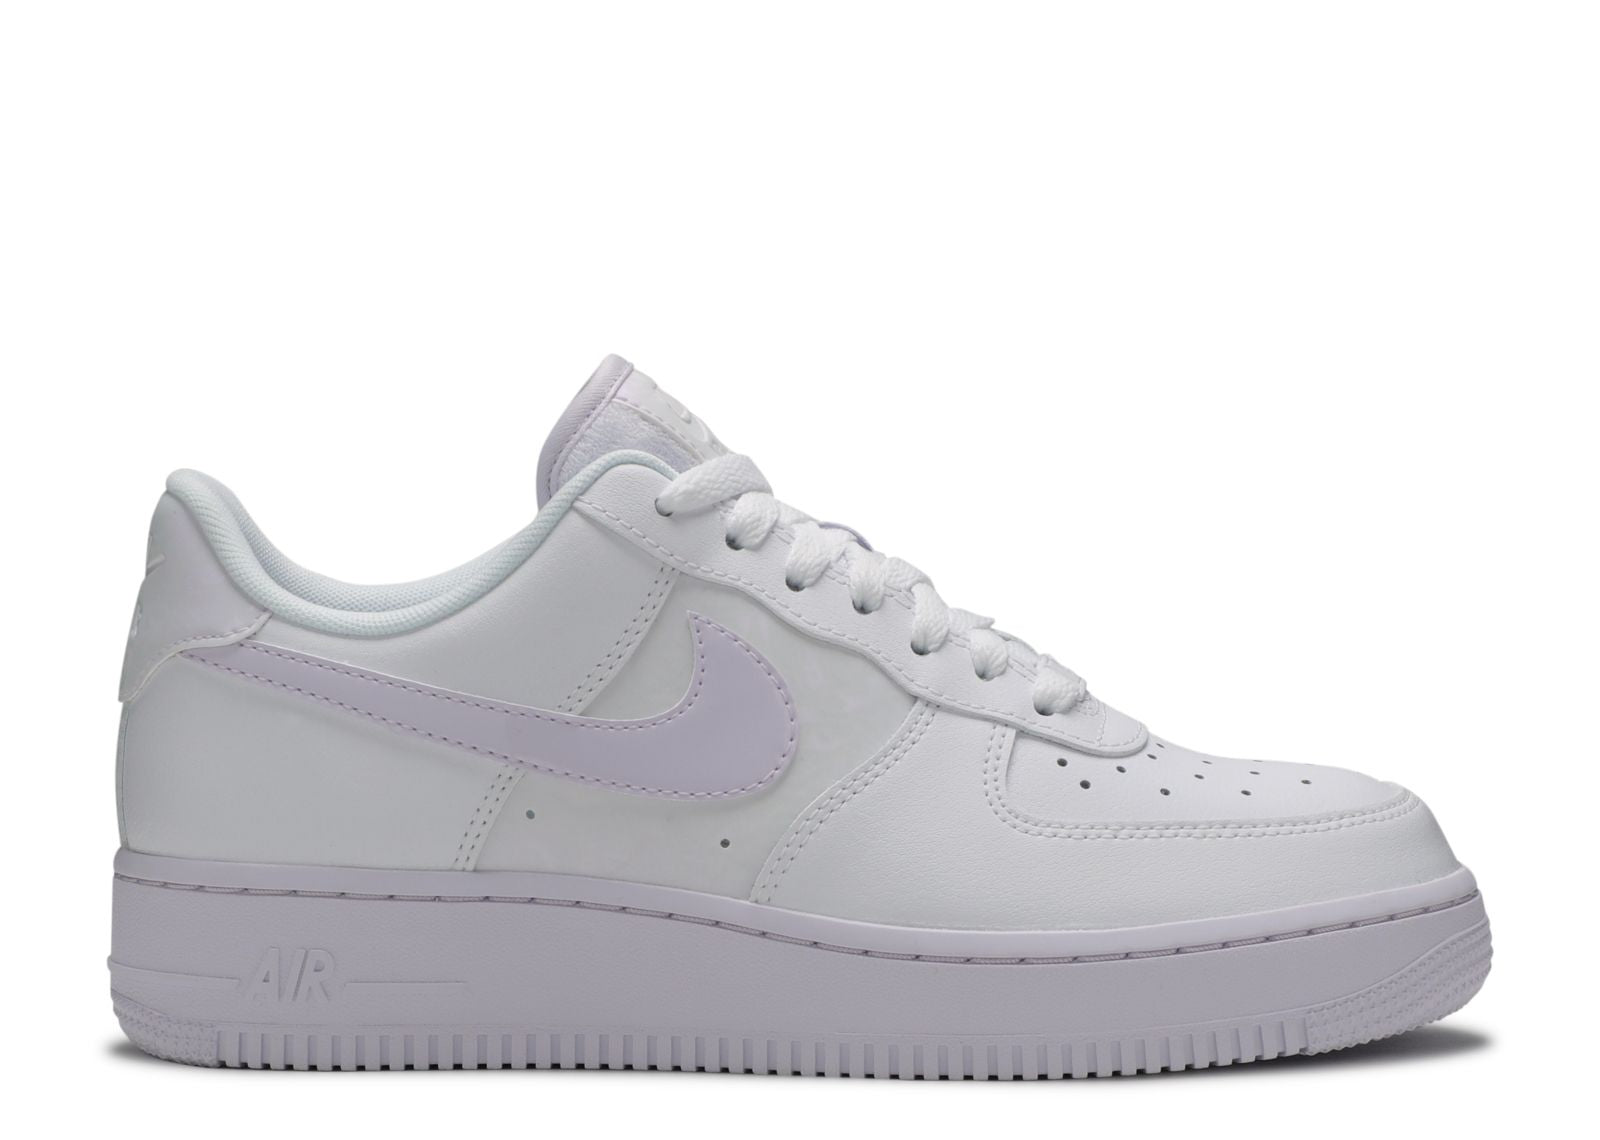 Second Chance - Air Force 1 Low White Barely Grape (W) - 36